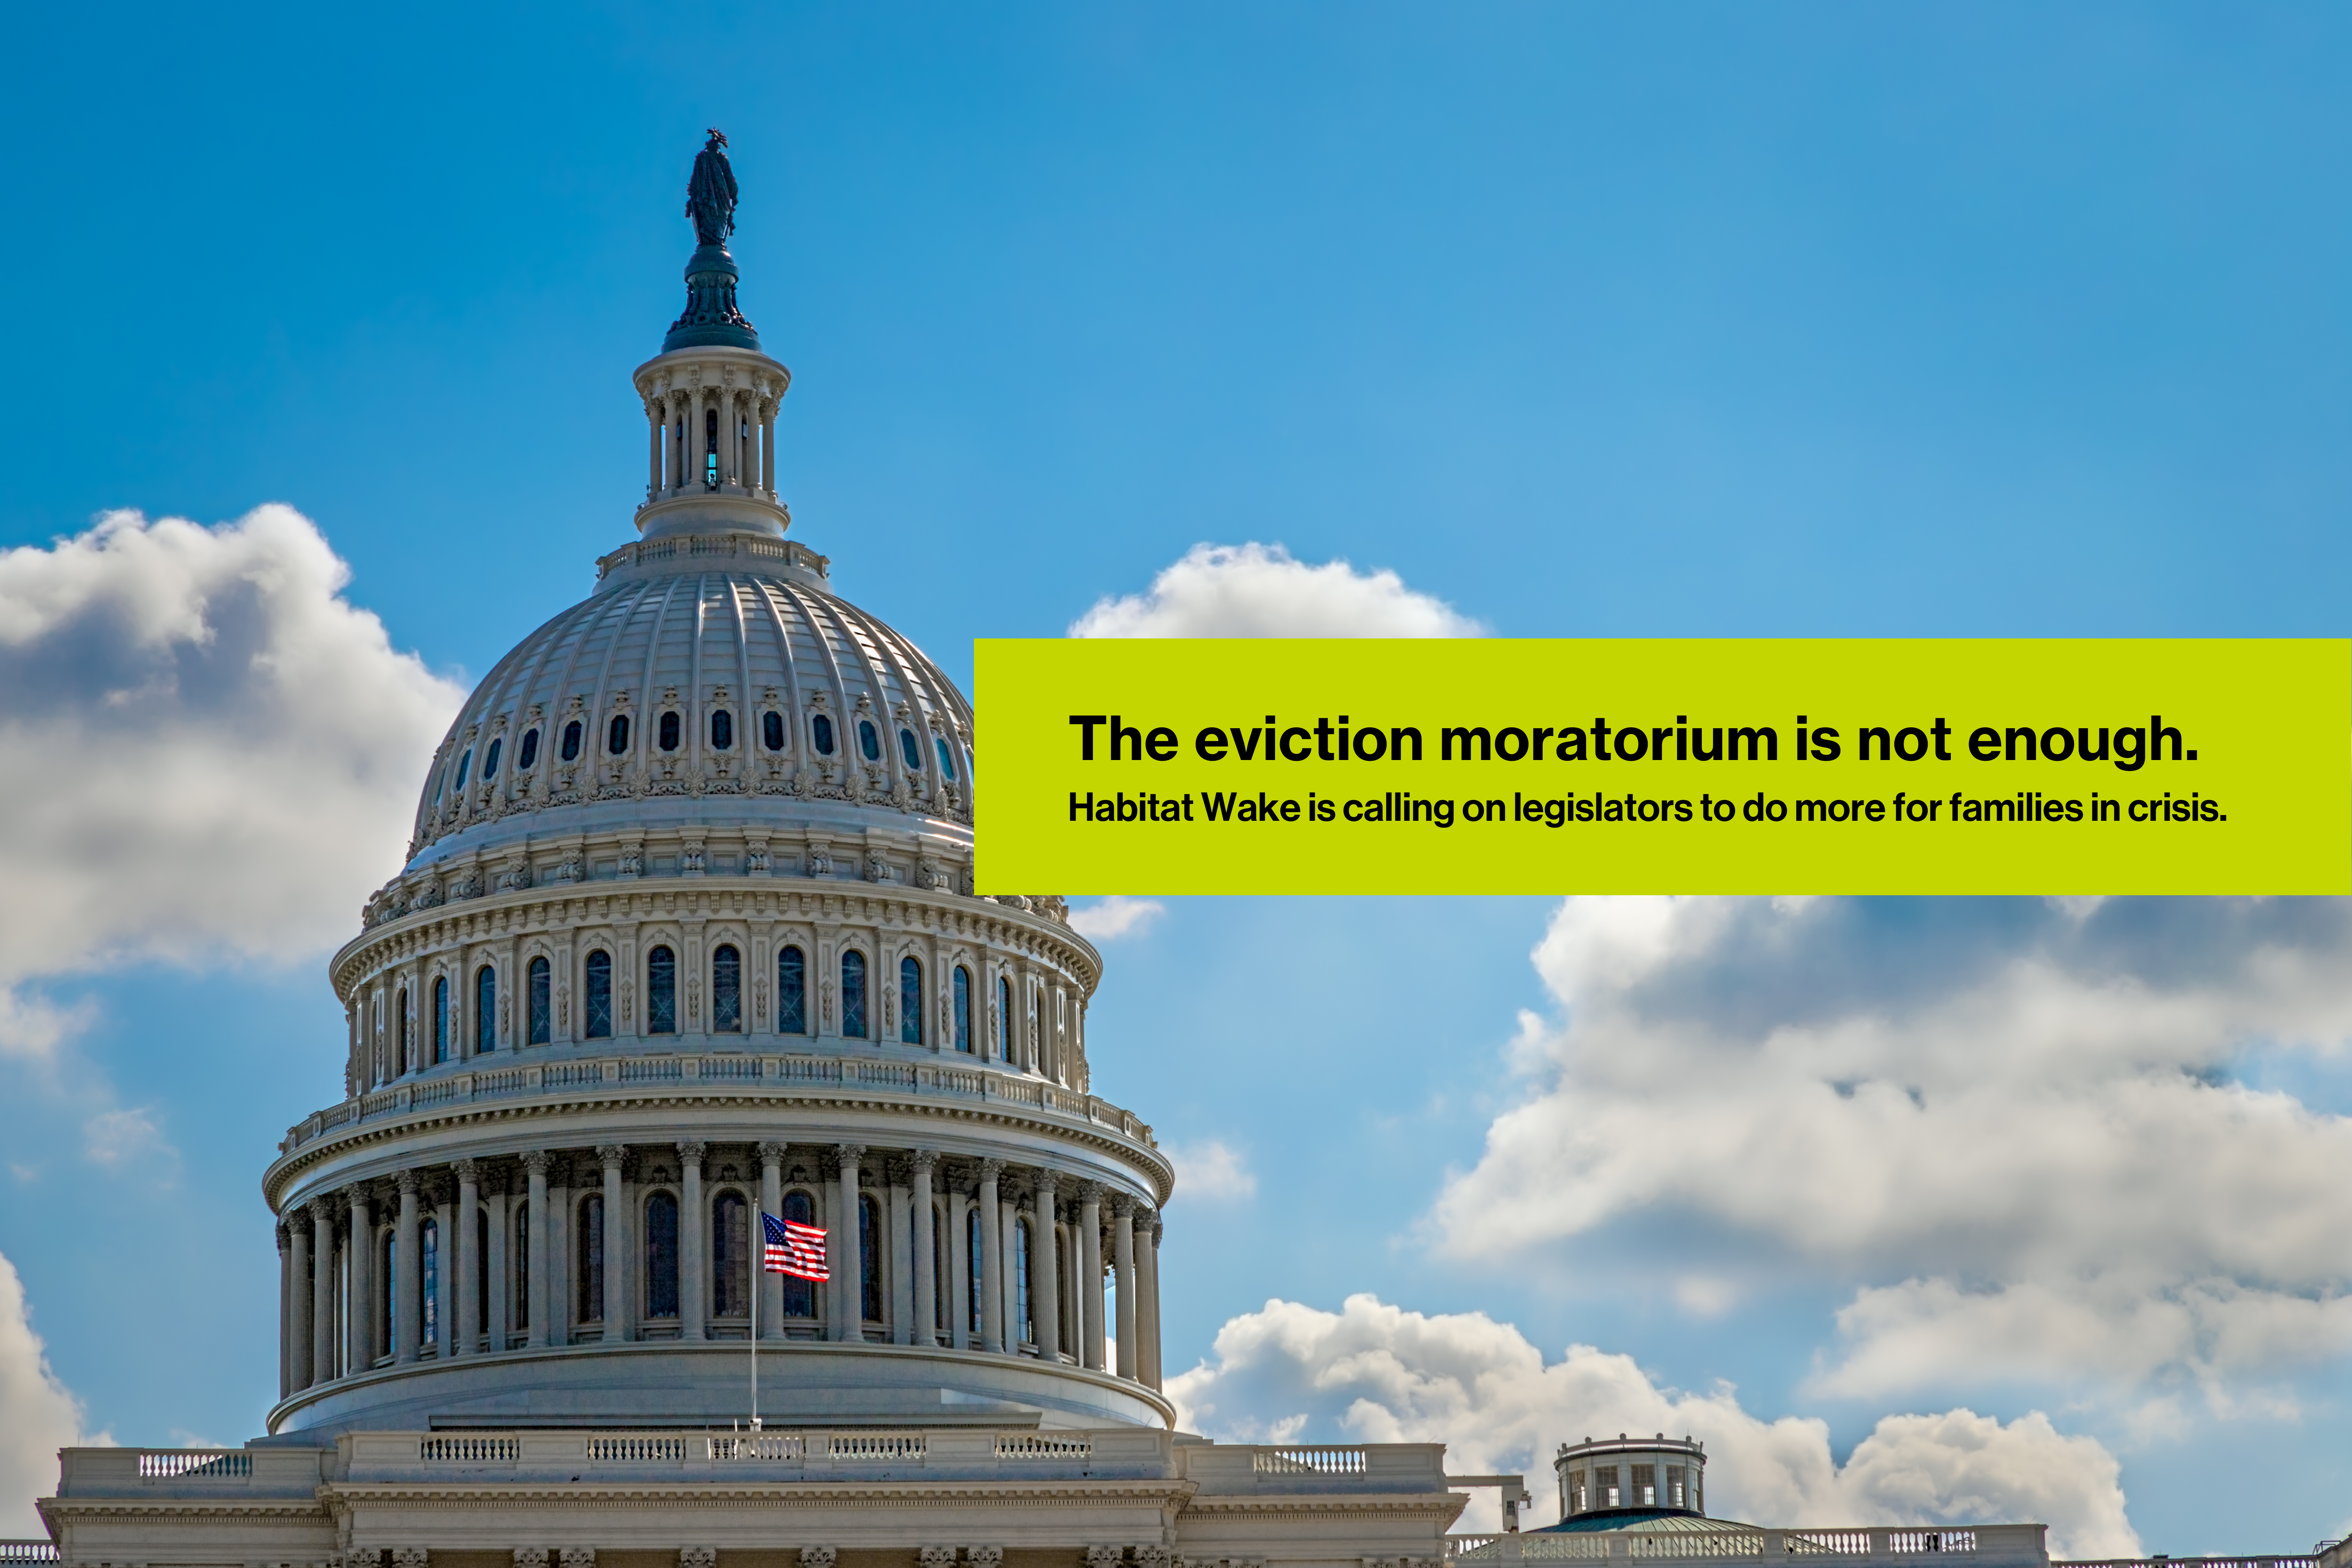 The eviction moratorium is not enough. Habitat Wake is calling on legislators to do more for families in crisis.